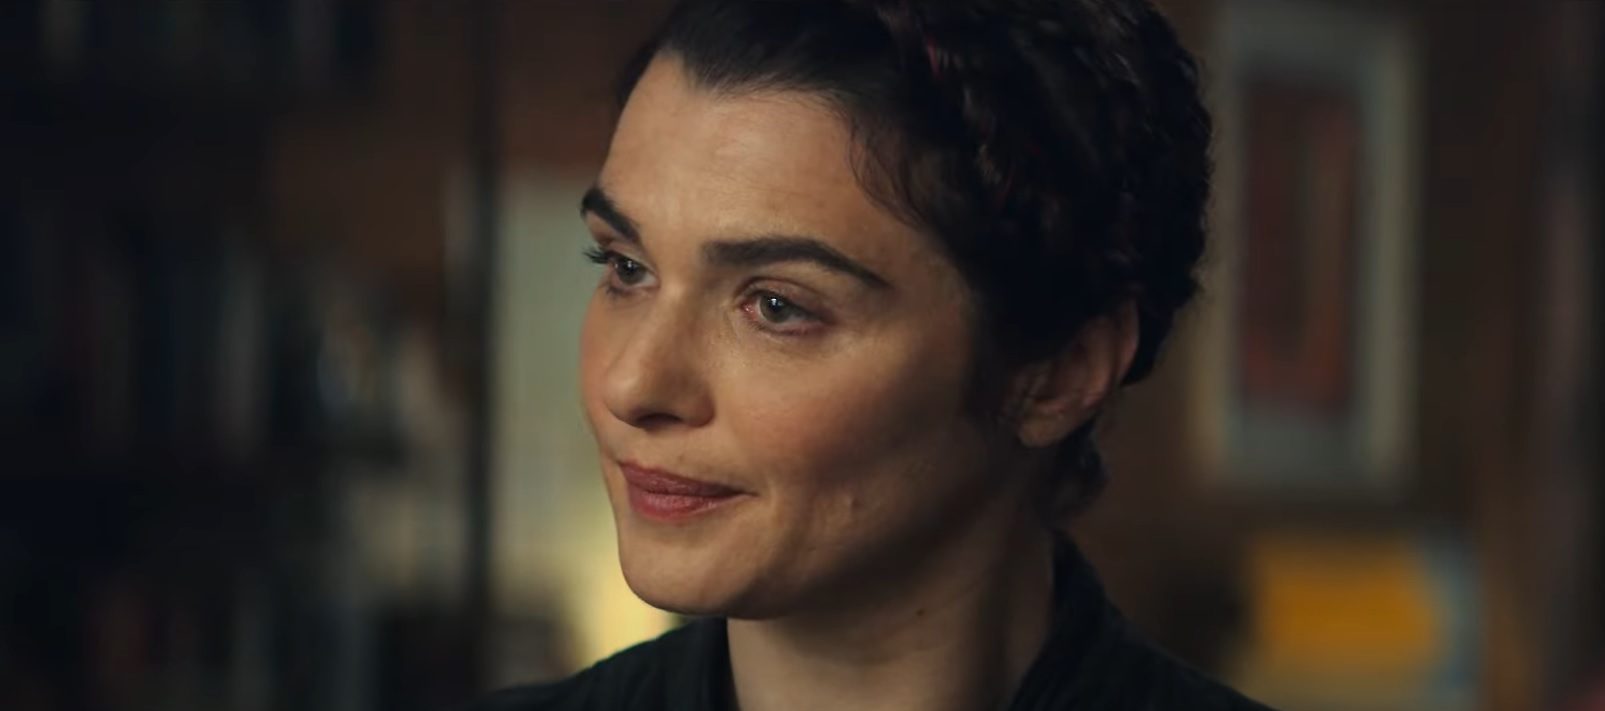 Rachel Weisz: All New Movie and TV Show Coming Out in 2023 and 2024